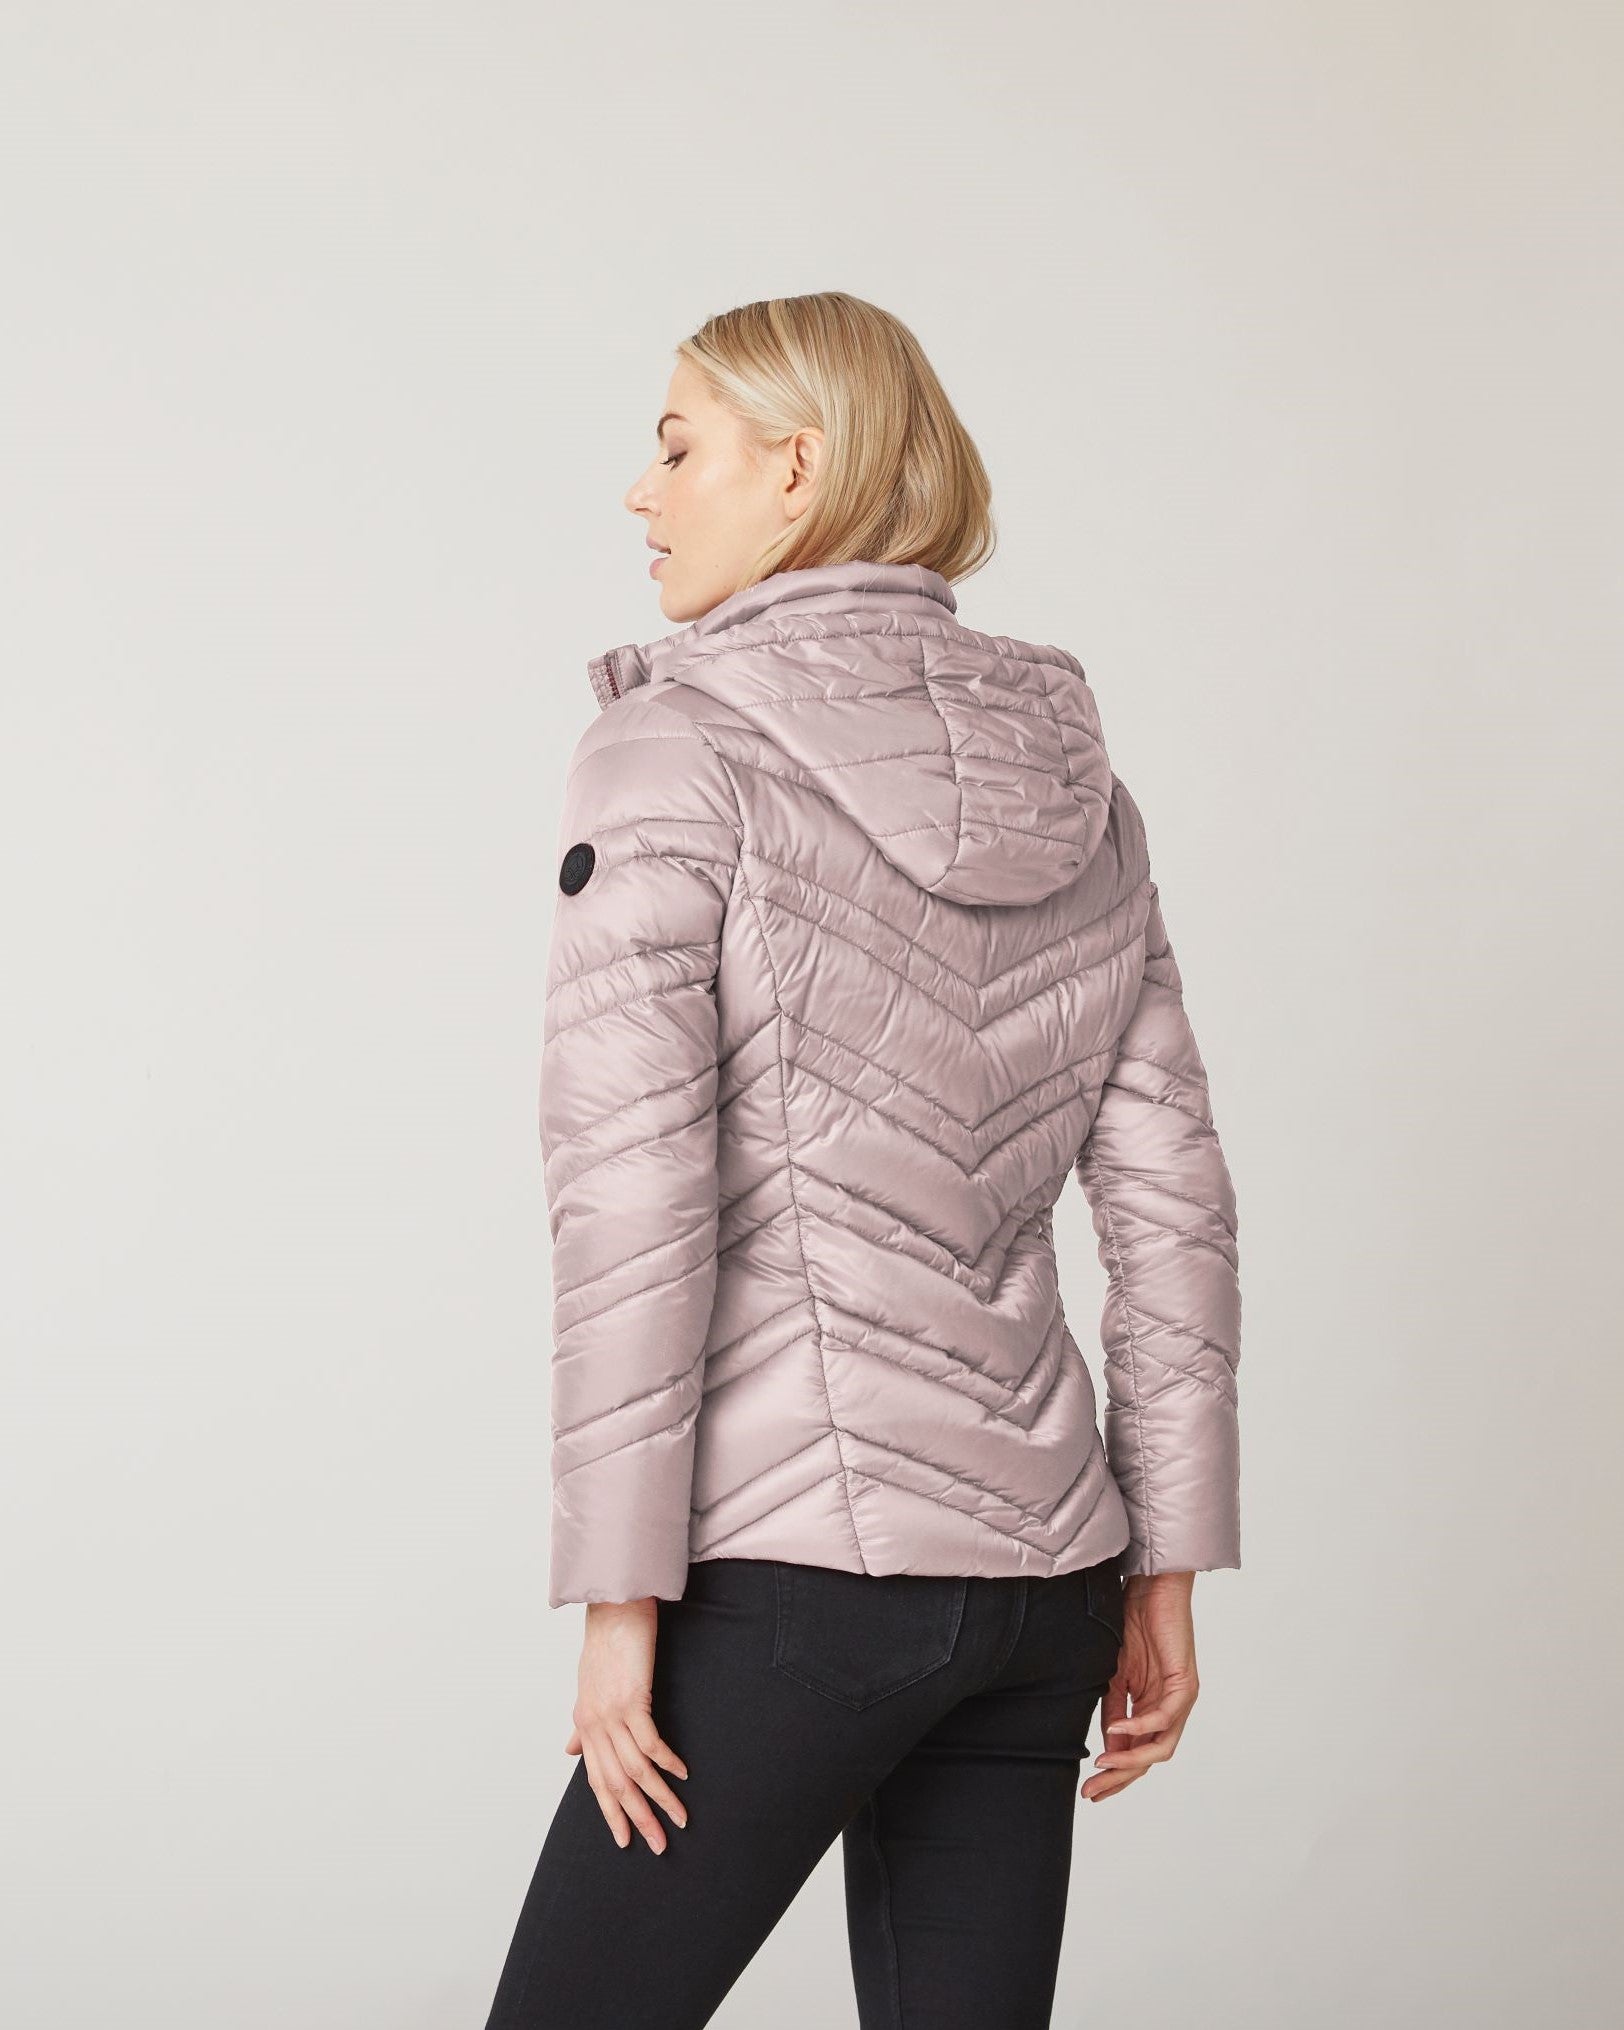 Winter Jackets | For Every Timeless 2 | Choices – Occasion Page